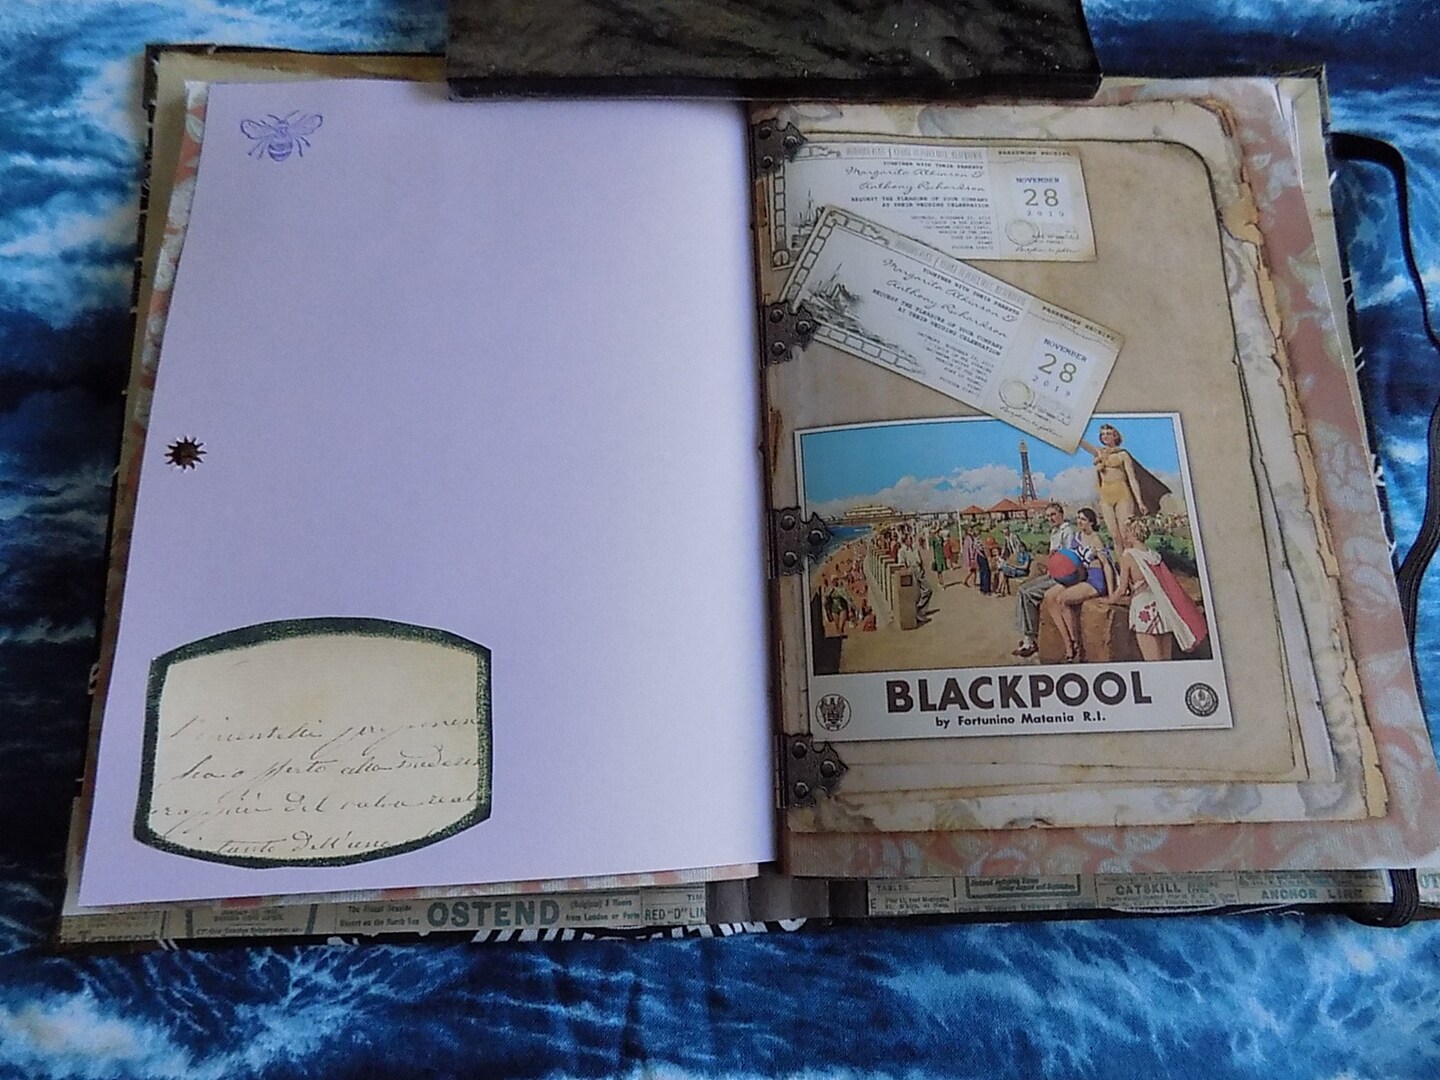 junk journal supplies blank pages and spaces for signatures journaling  papers